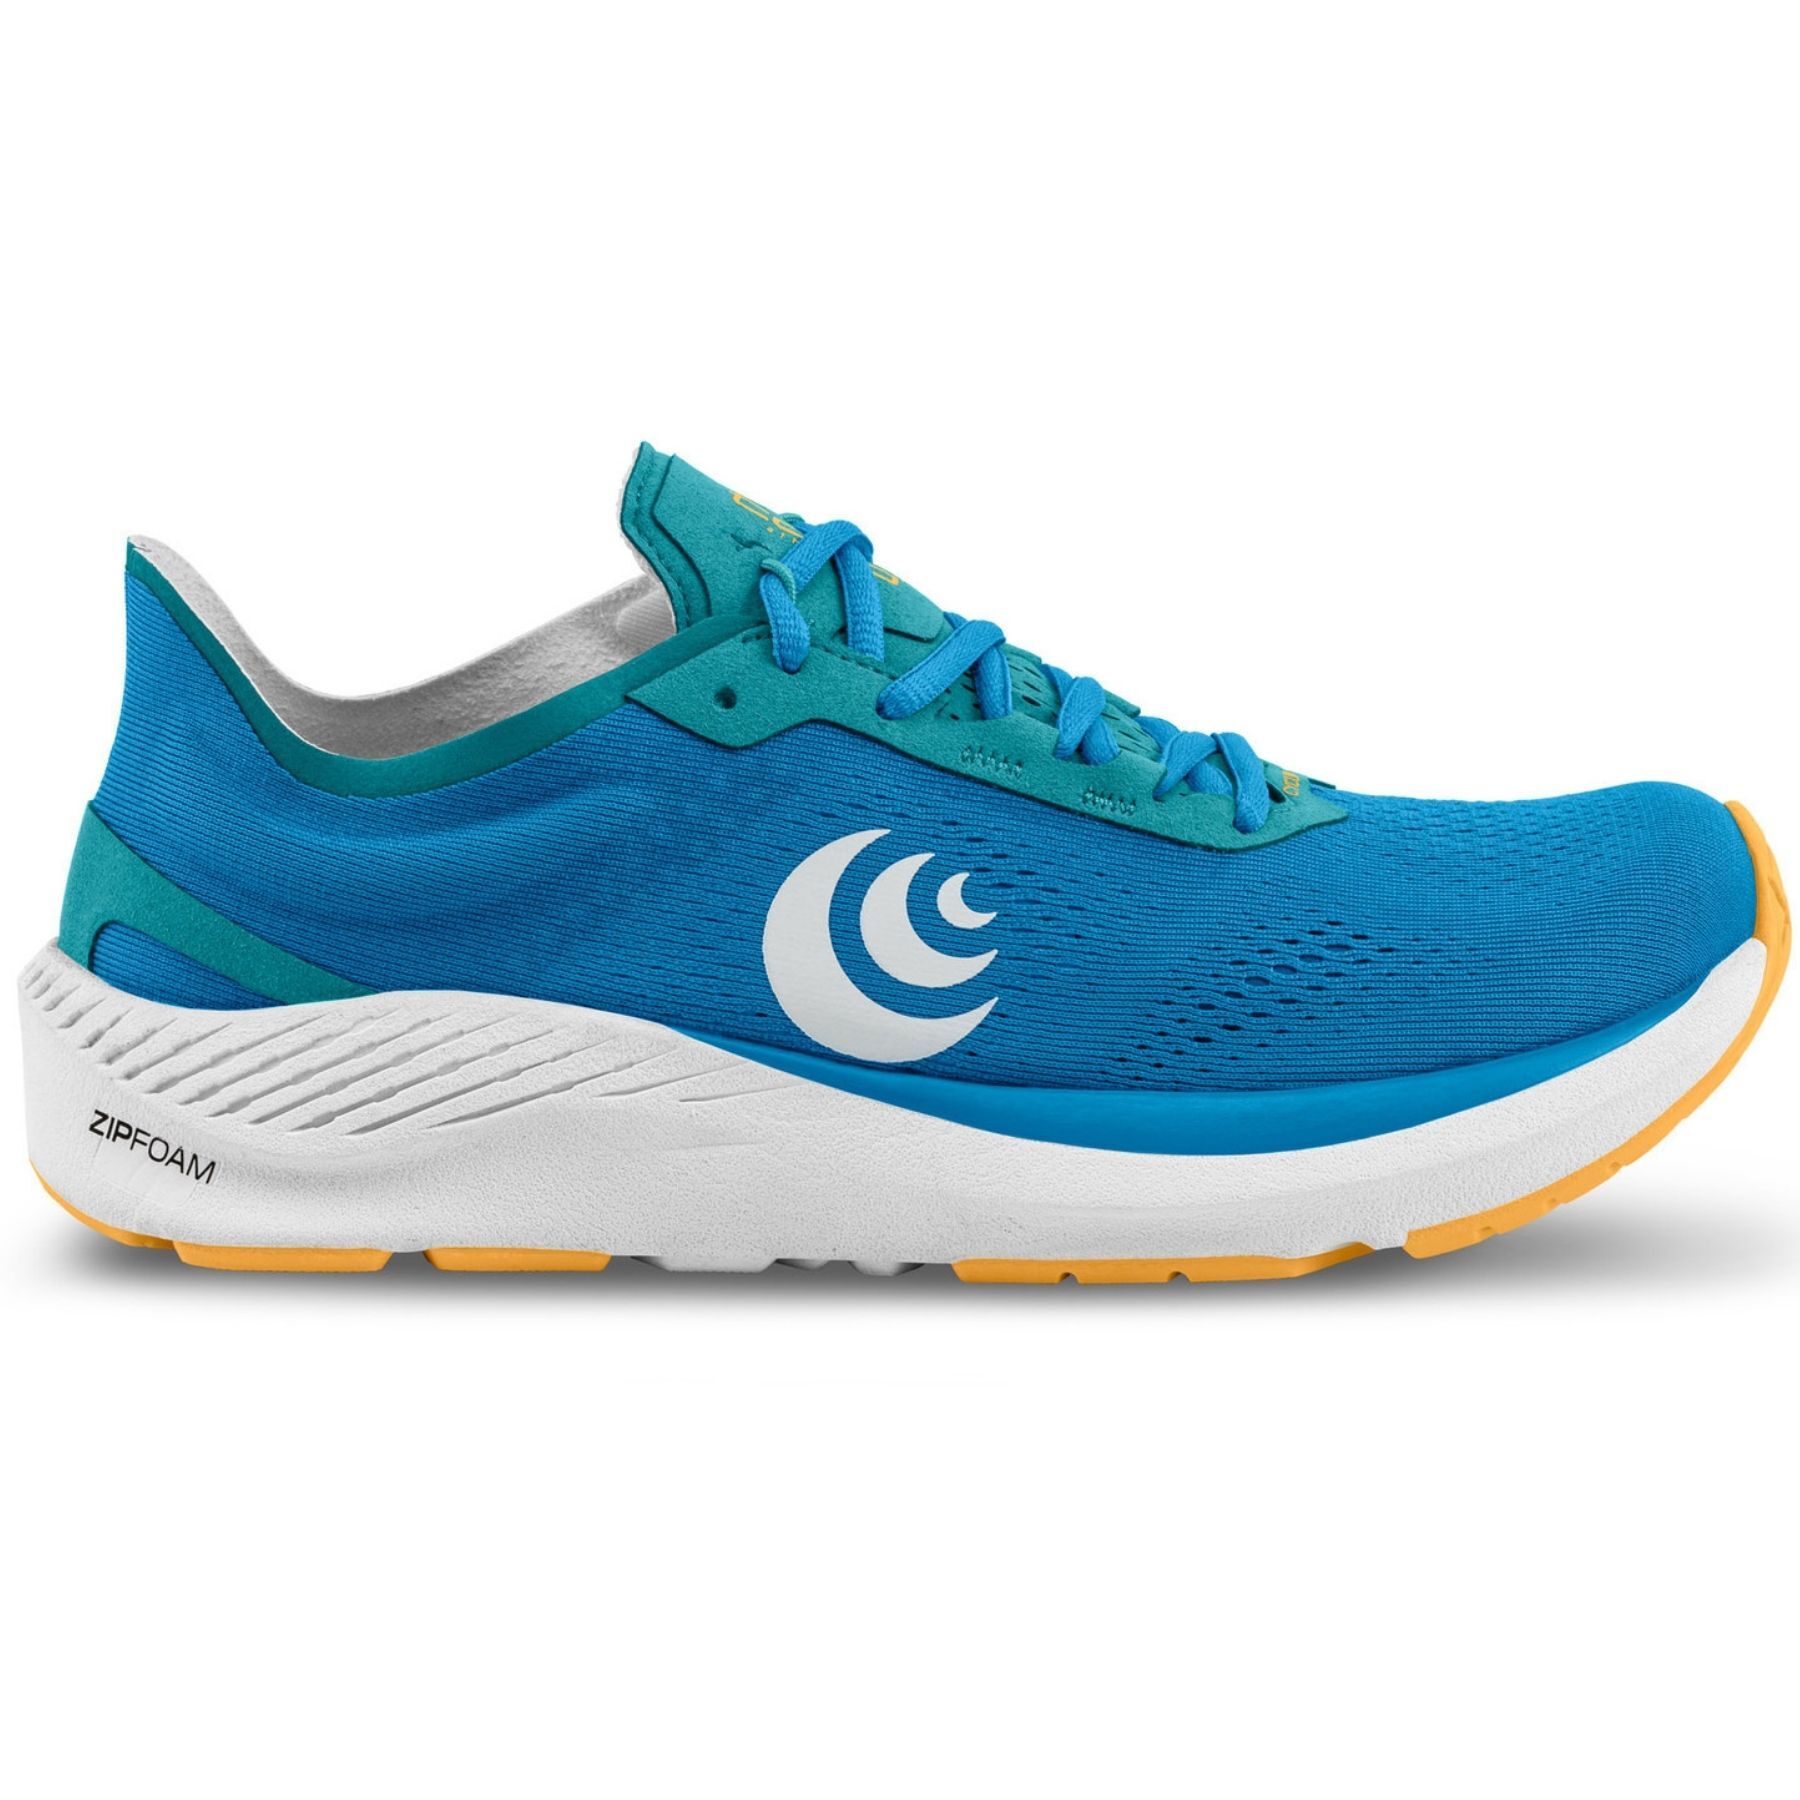 Topo Athletic Cyclone - Running shoes - Women's